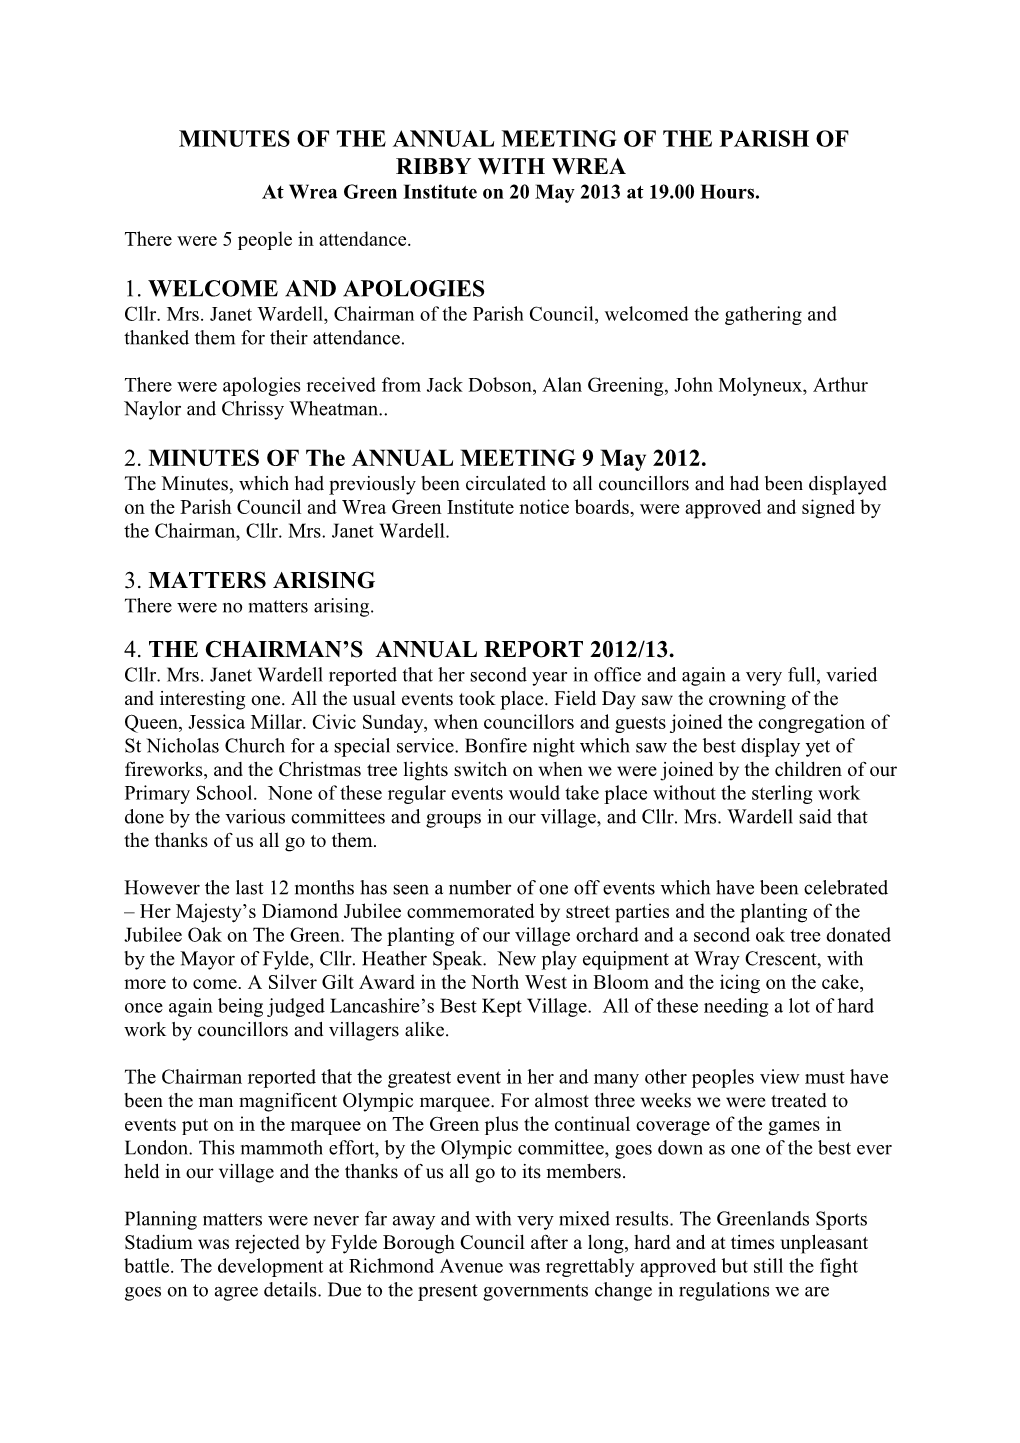 Minutes of the Annual Meeting of the Parish Of